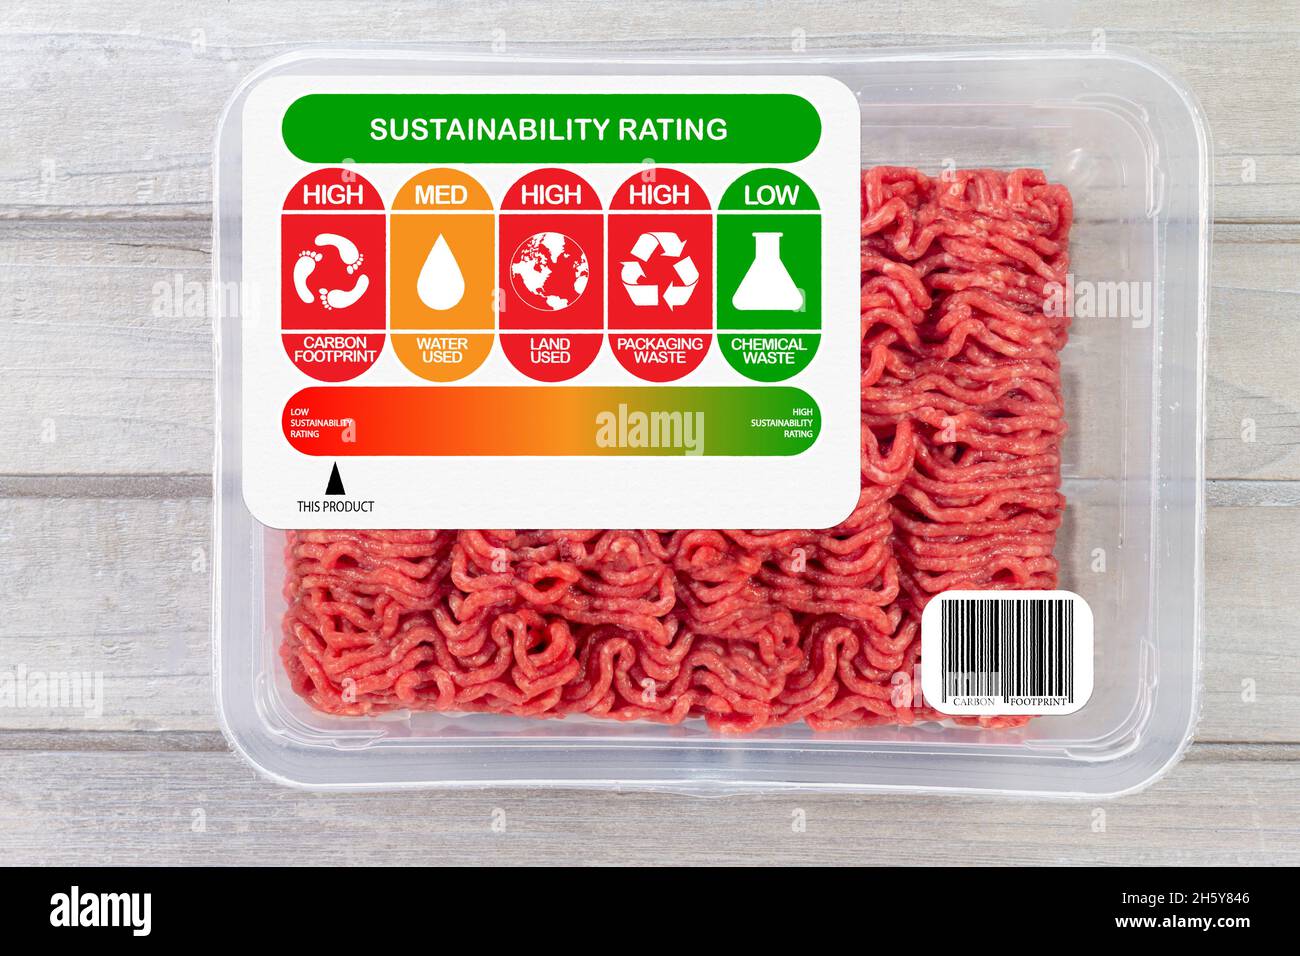 https://c8.alamy.com/comp/2H5Y846/sustainability-rating-on-meat-for-carbon-footprint-water-use-land-use-packaging-waste-and-chemical-waste-label-product-scale-on-rating-index-cons-2H5Y846.jpg